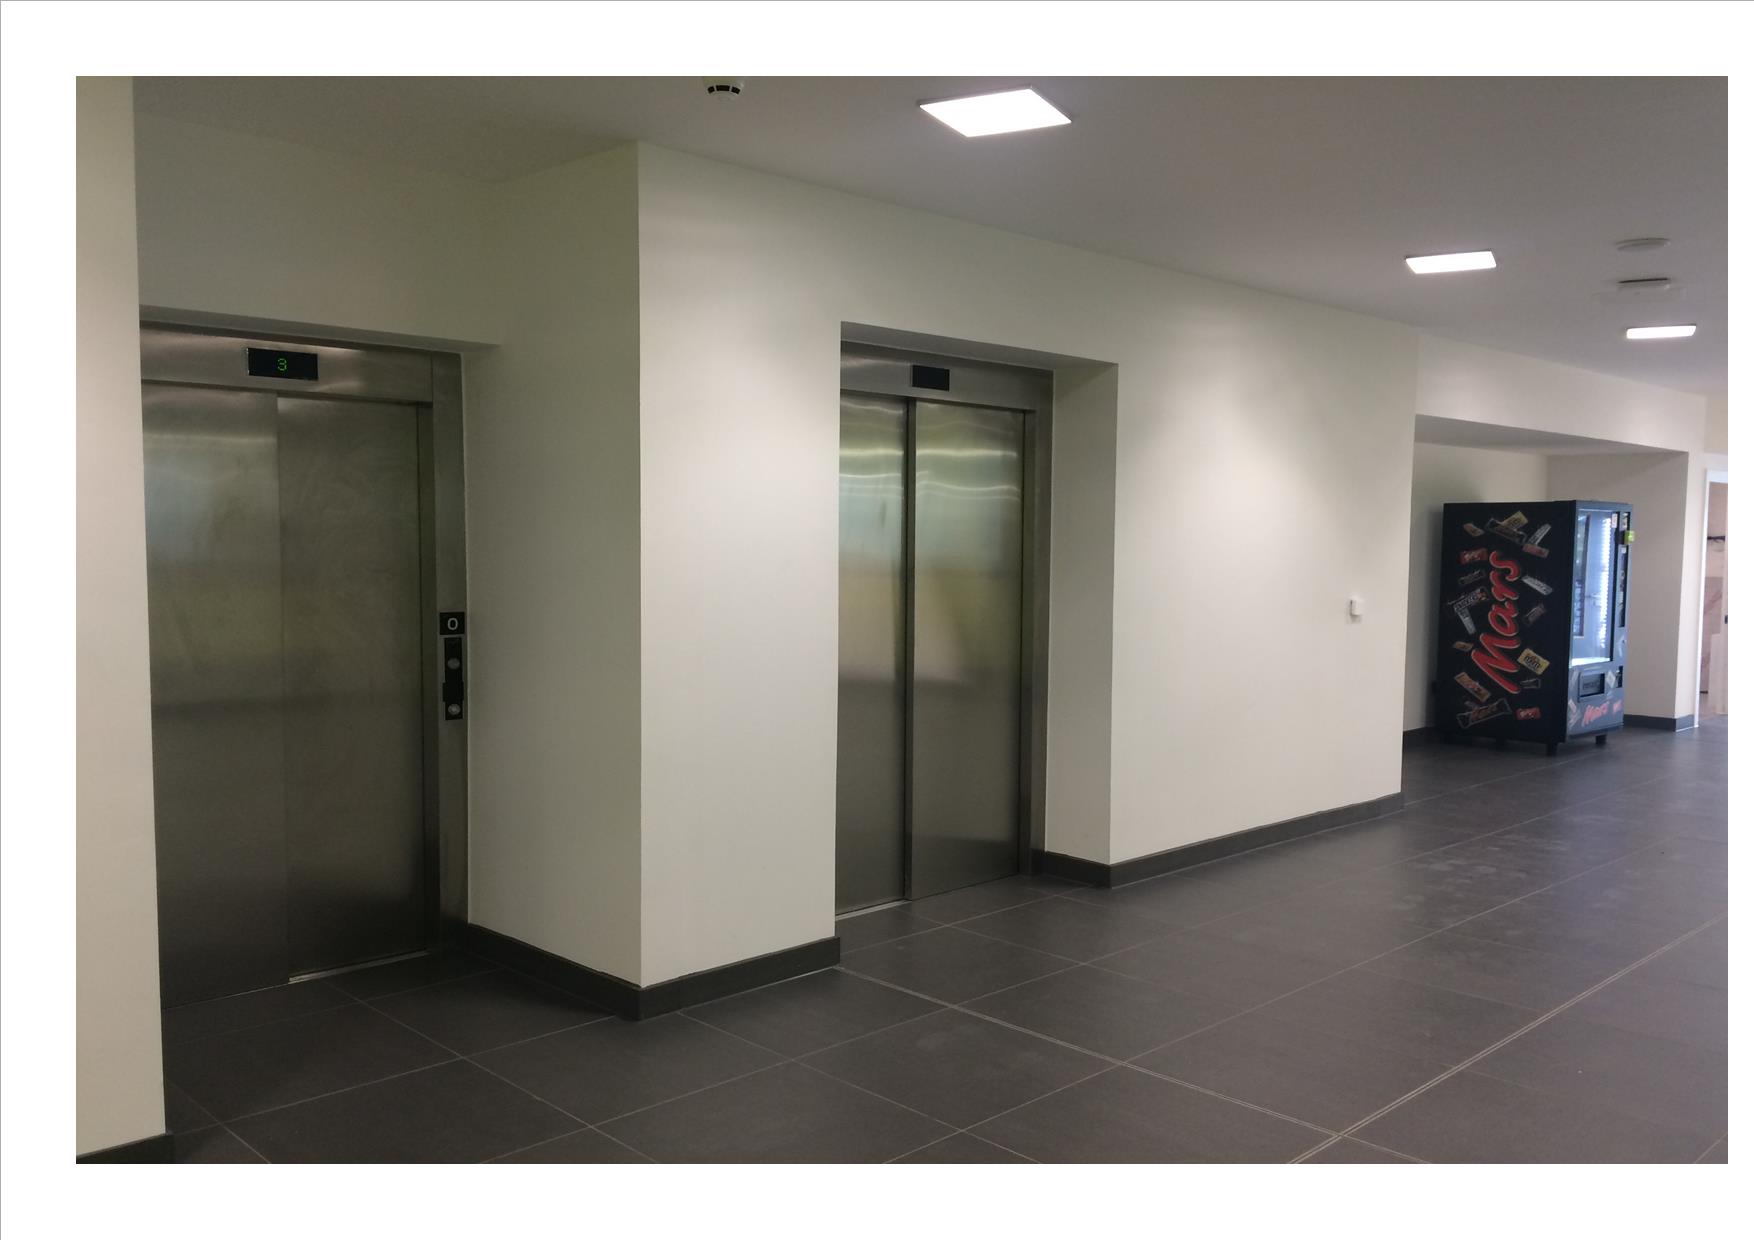 image of lifts leading to second floor